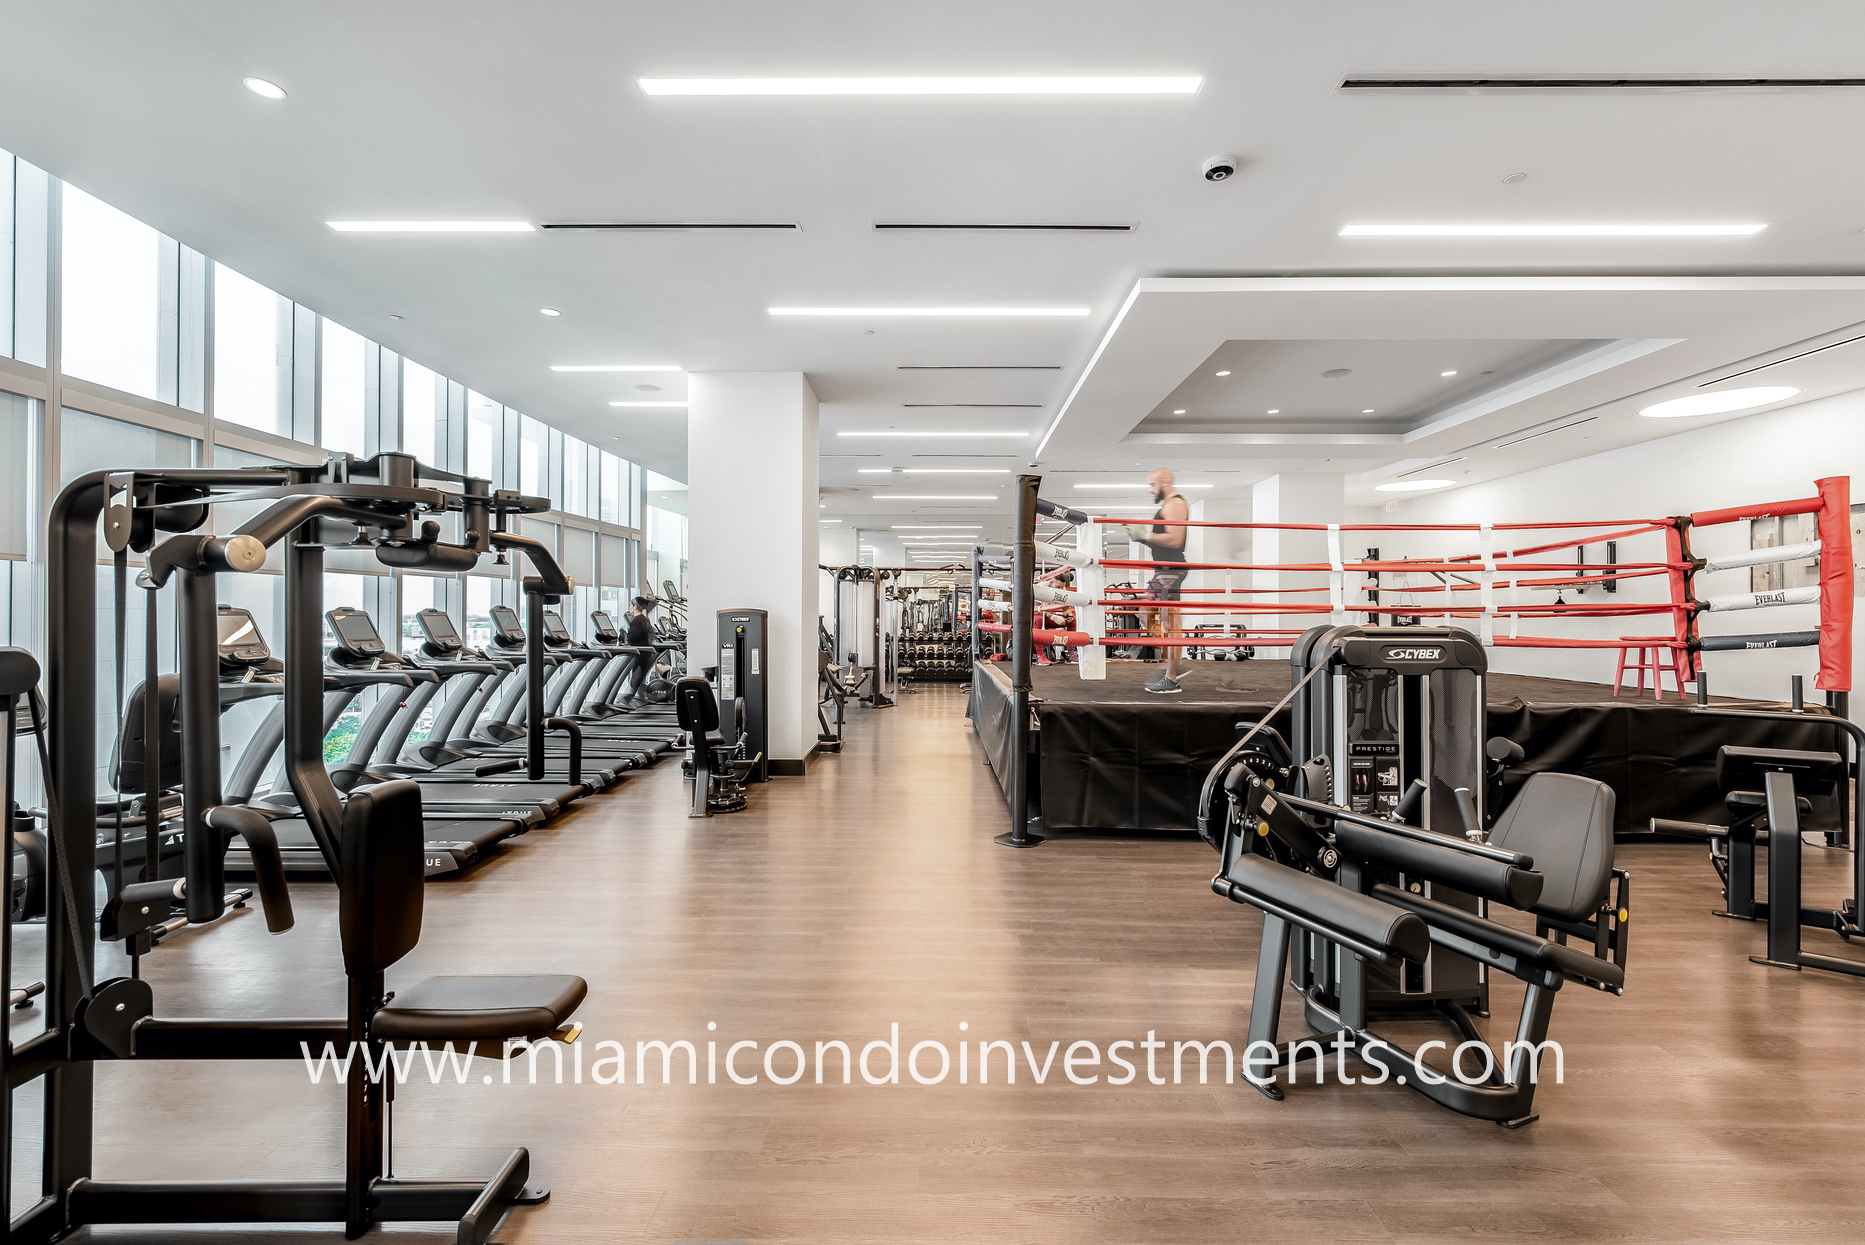 Paramount Miami gym and boxing ring